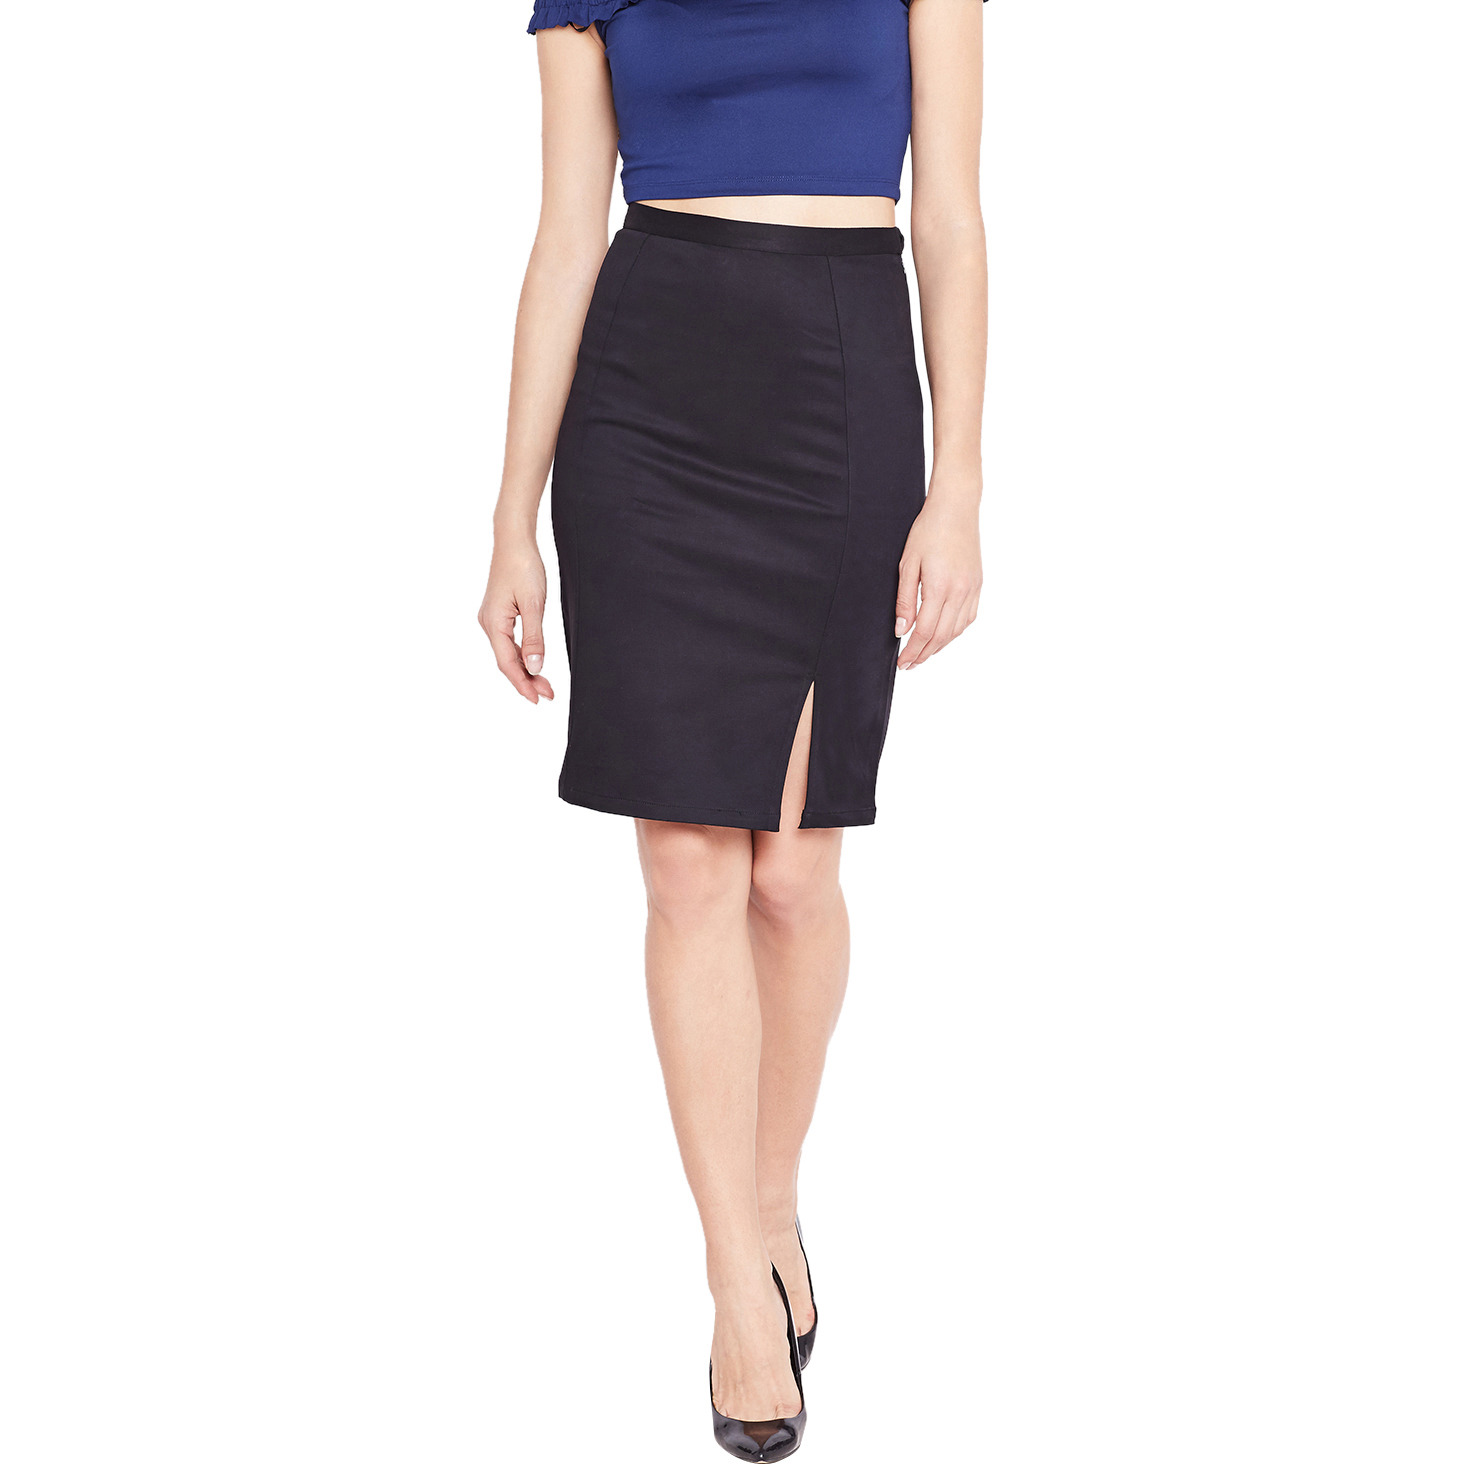 Purplicious Black Formal Pencil Skirt With Front Slit